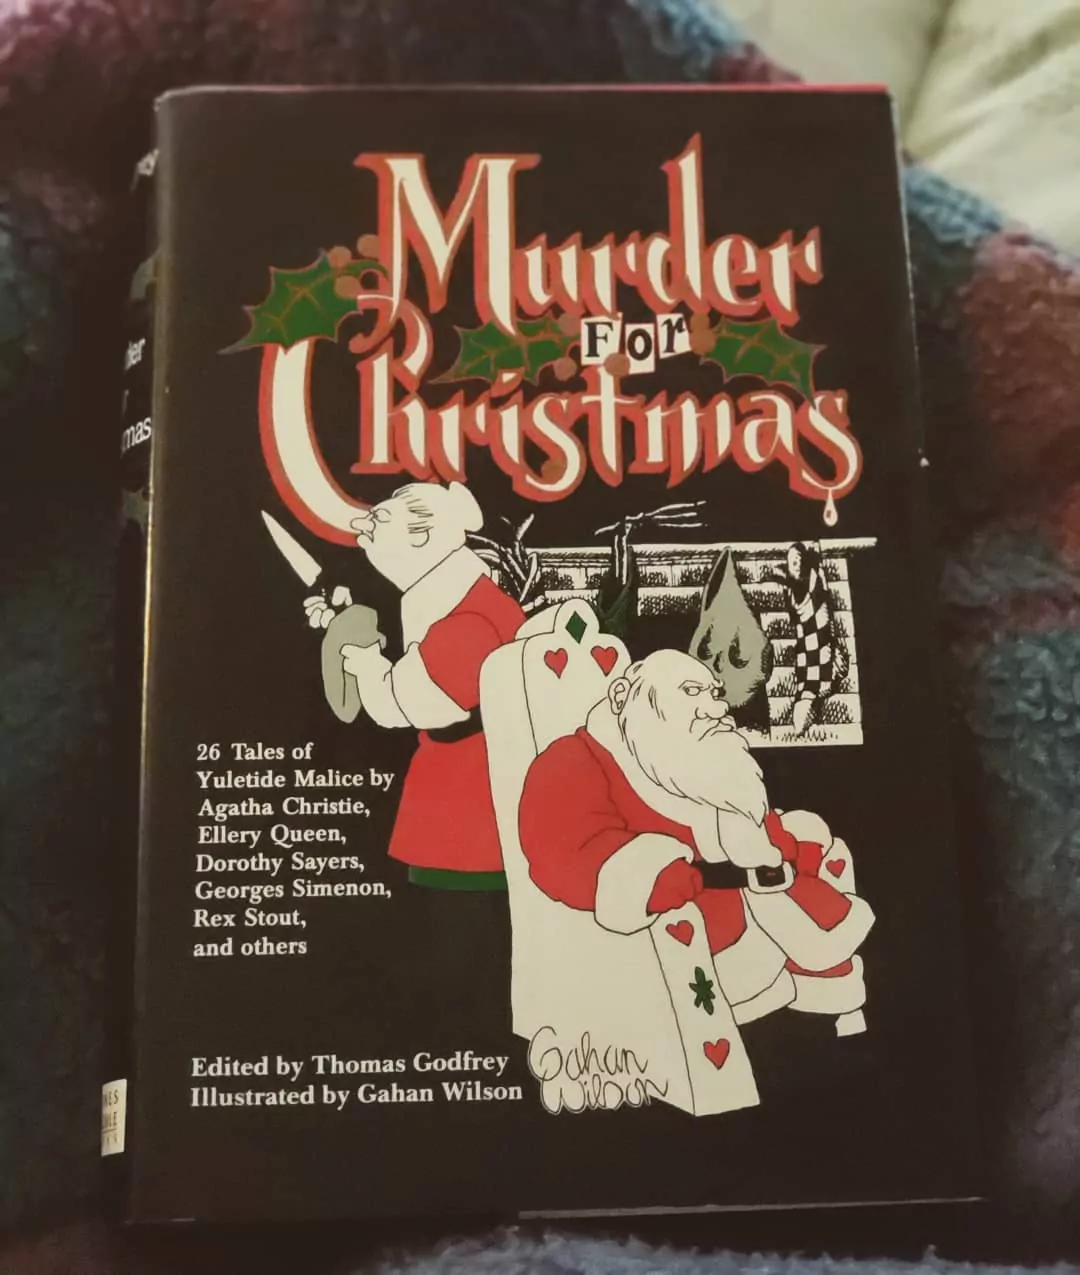 7 Christmas Books to Read When You Celebrate the Holiday Alone Murder For Christmas 26 Tales of Seasonal Malice edited by Thomas Godfrey